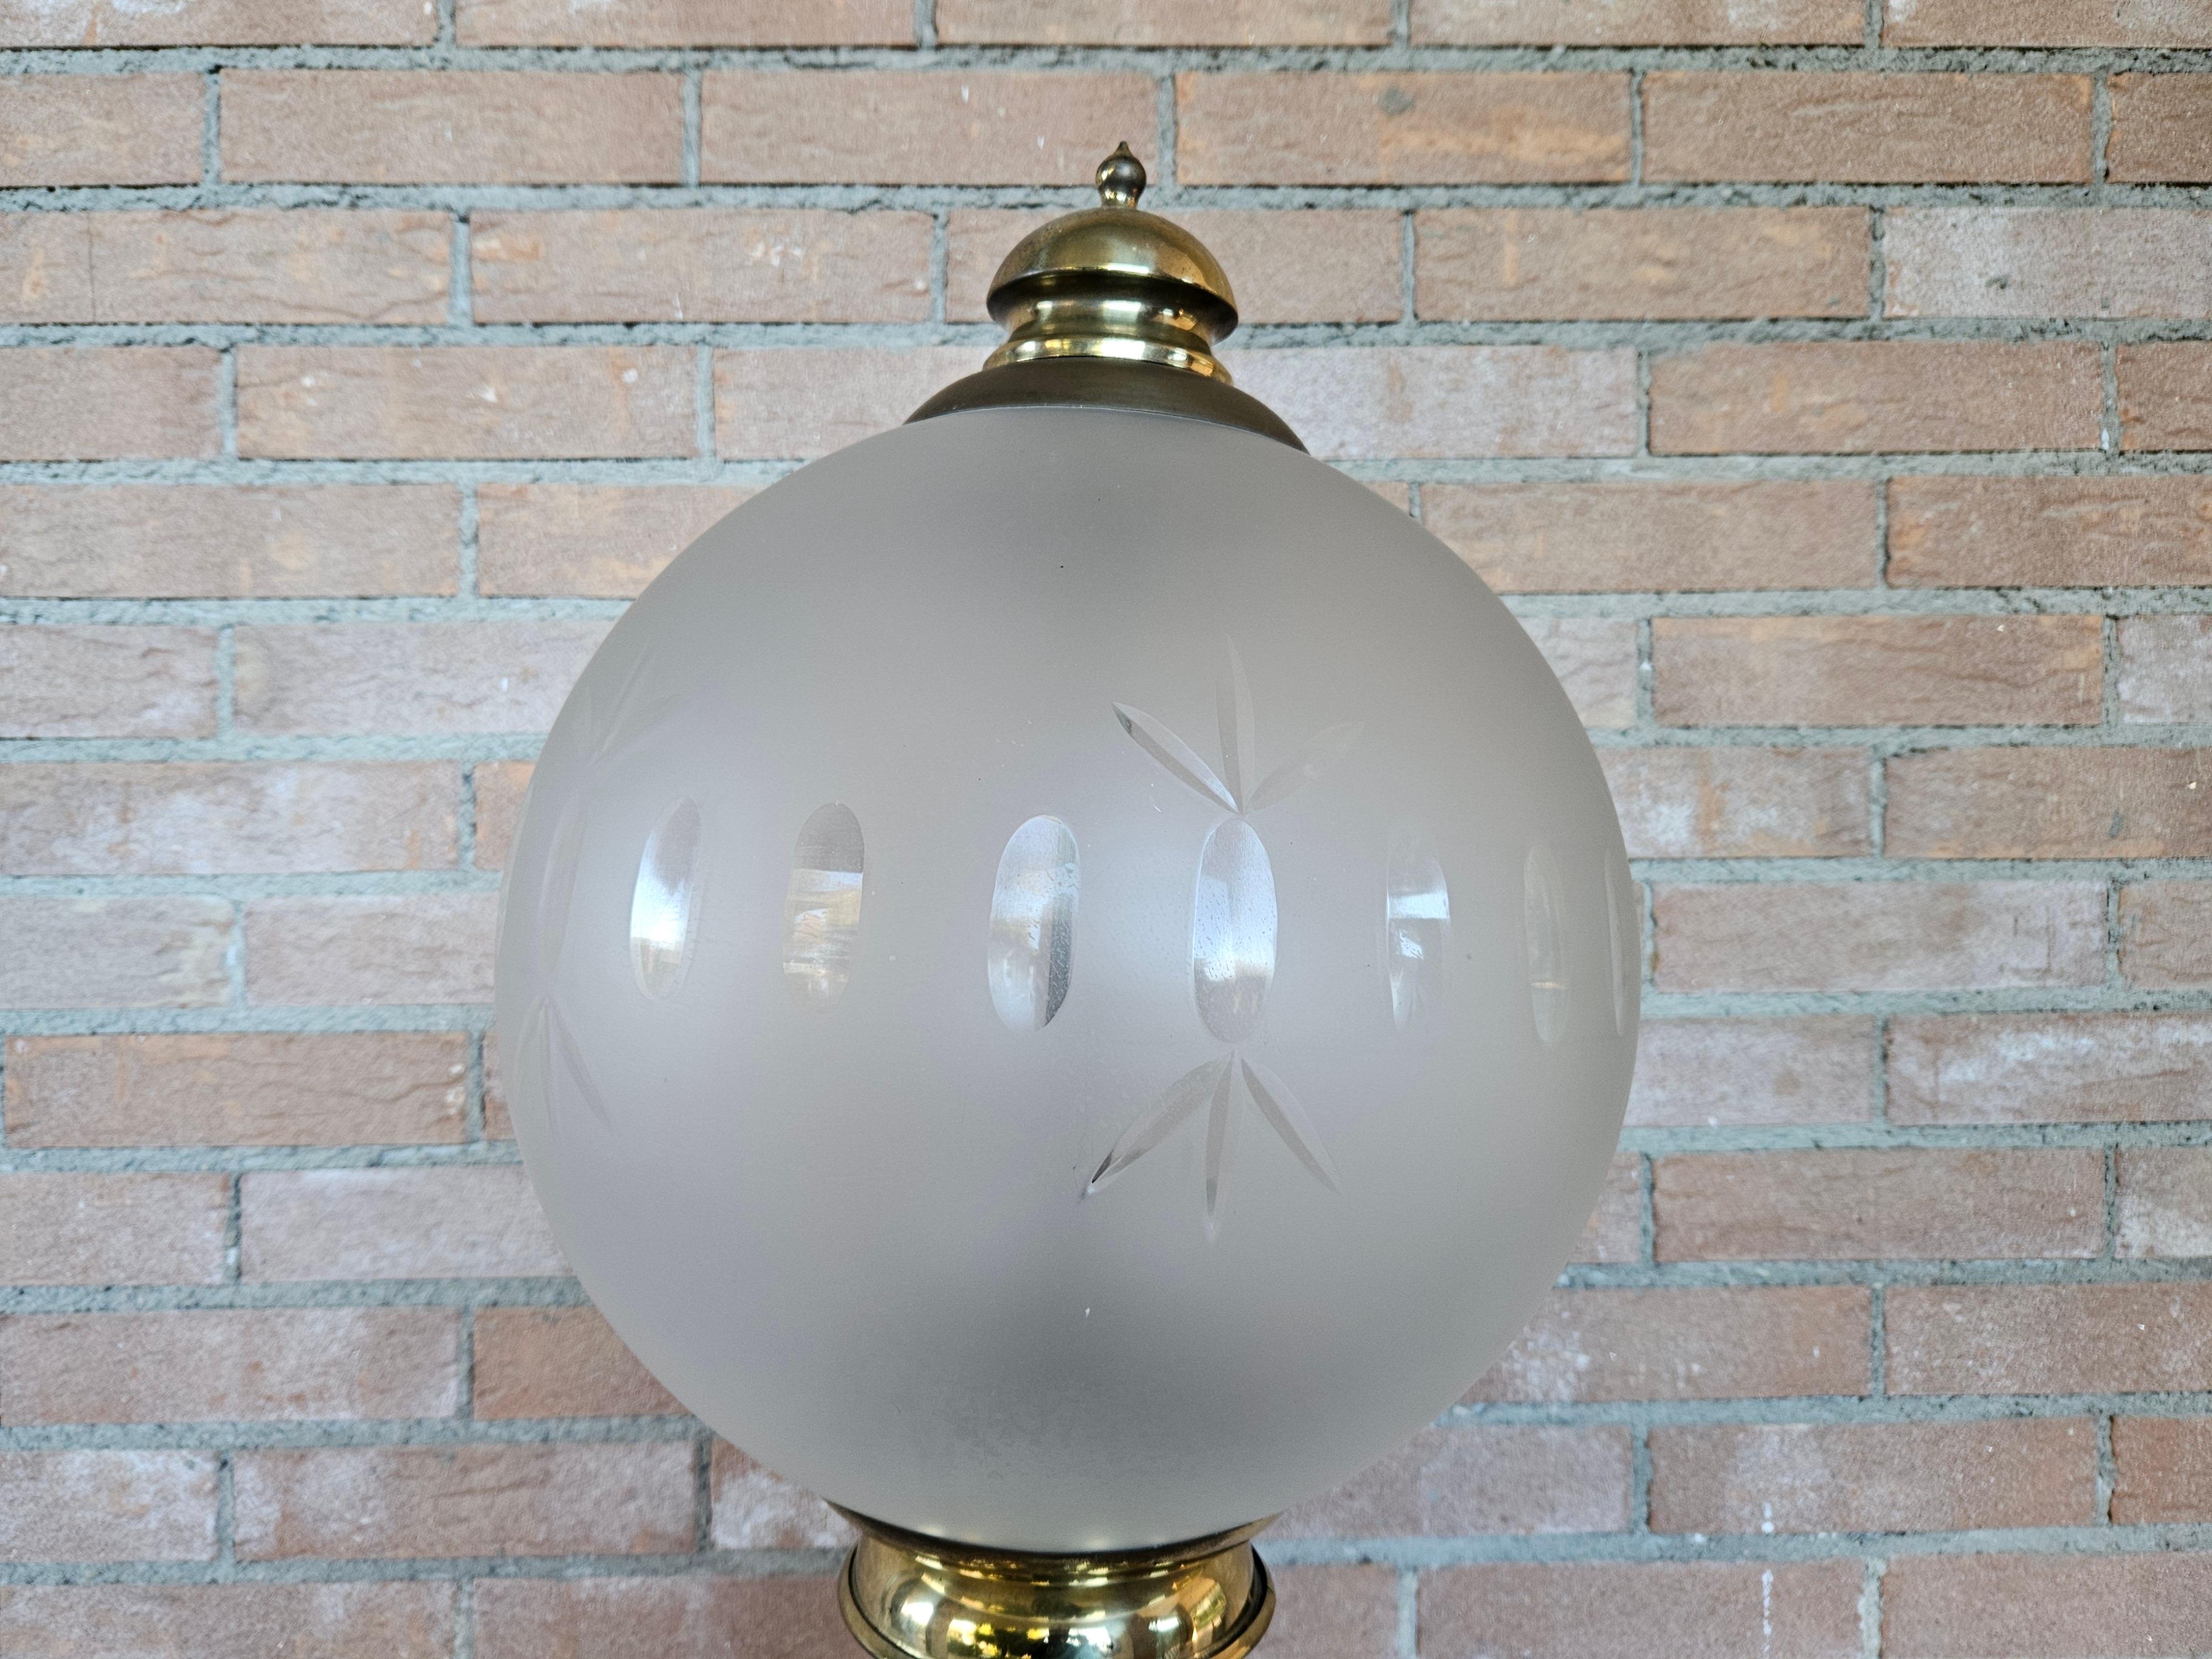 Floor lamp with frosted and decorated glass ceiling light, brass frame and circular marble base.

Italian furniture element from the early 1980s, very suitable for modern and vintage entrances or living rooms.

Shows normal signs of wear from age